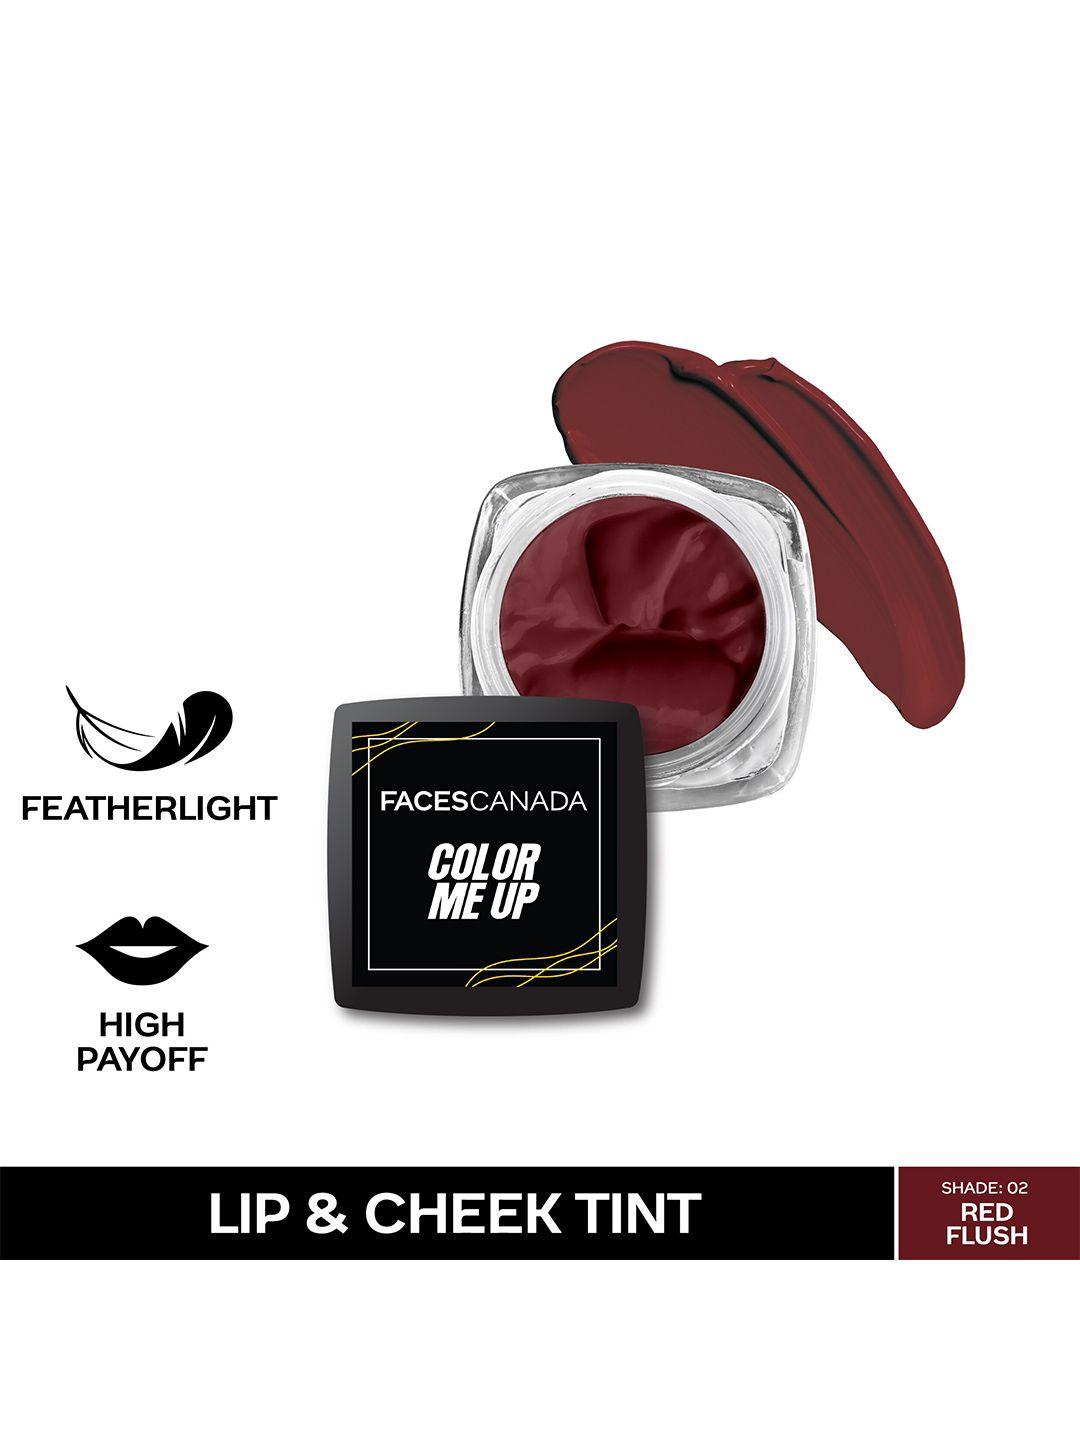 faces canada color me up featherlight & high payoff lip & cheek tint - red flush 02